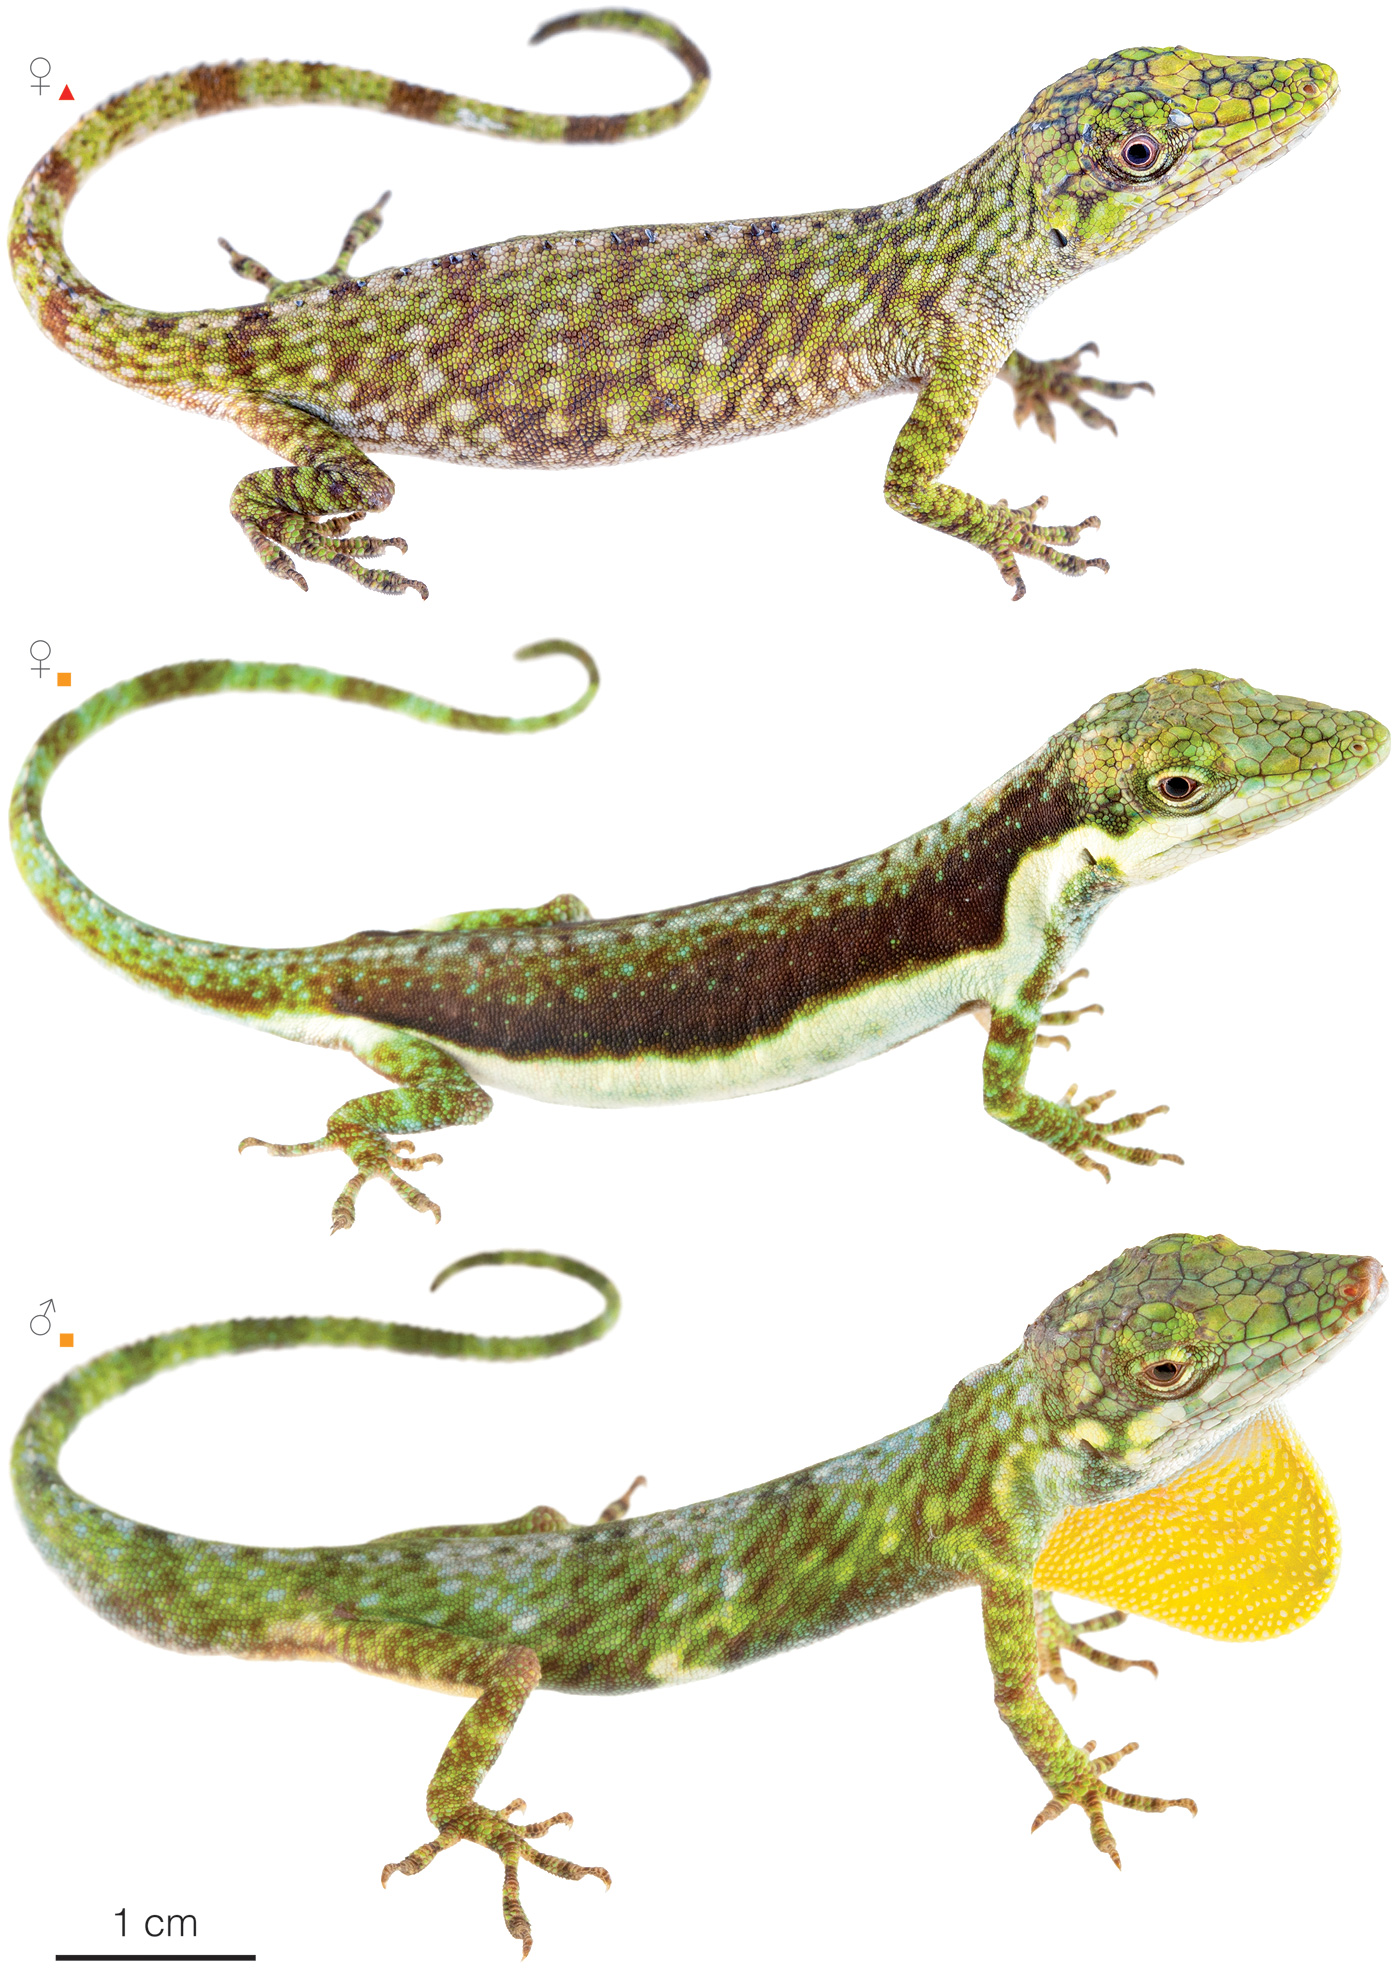 Figure showing variation among individuals of Anolis orcesi